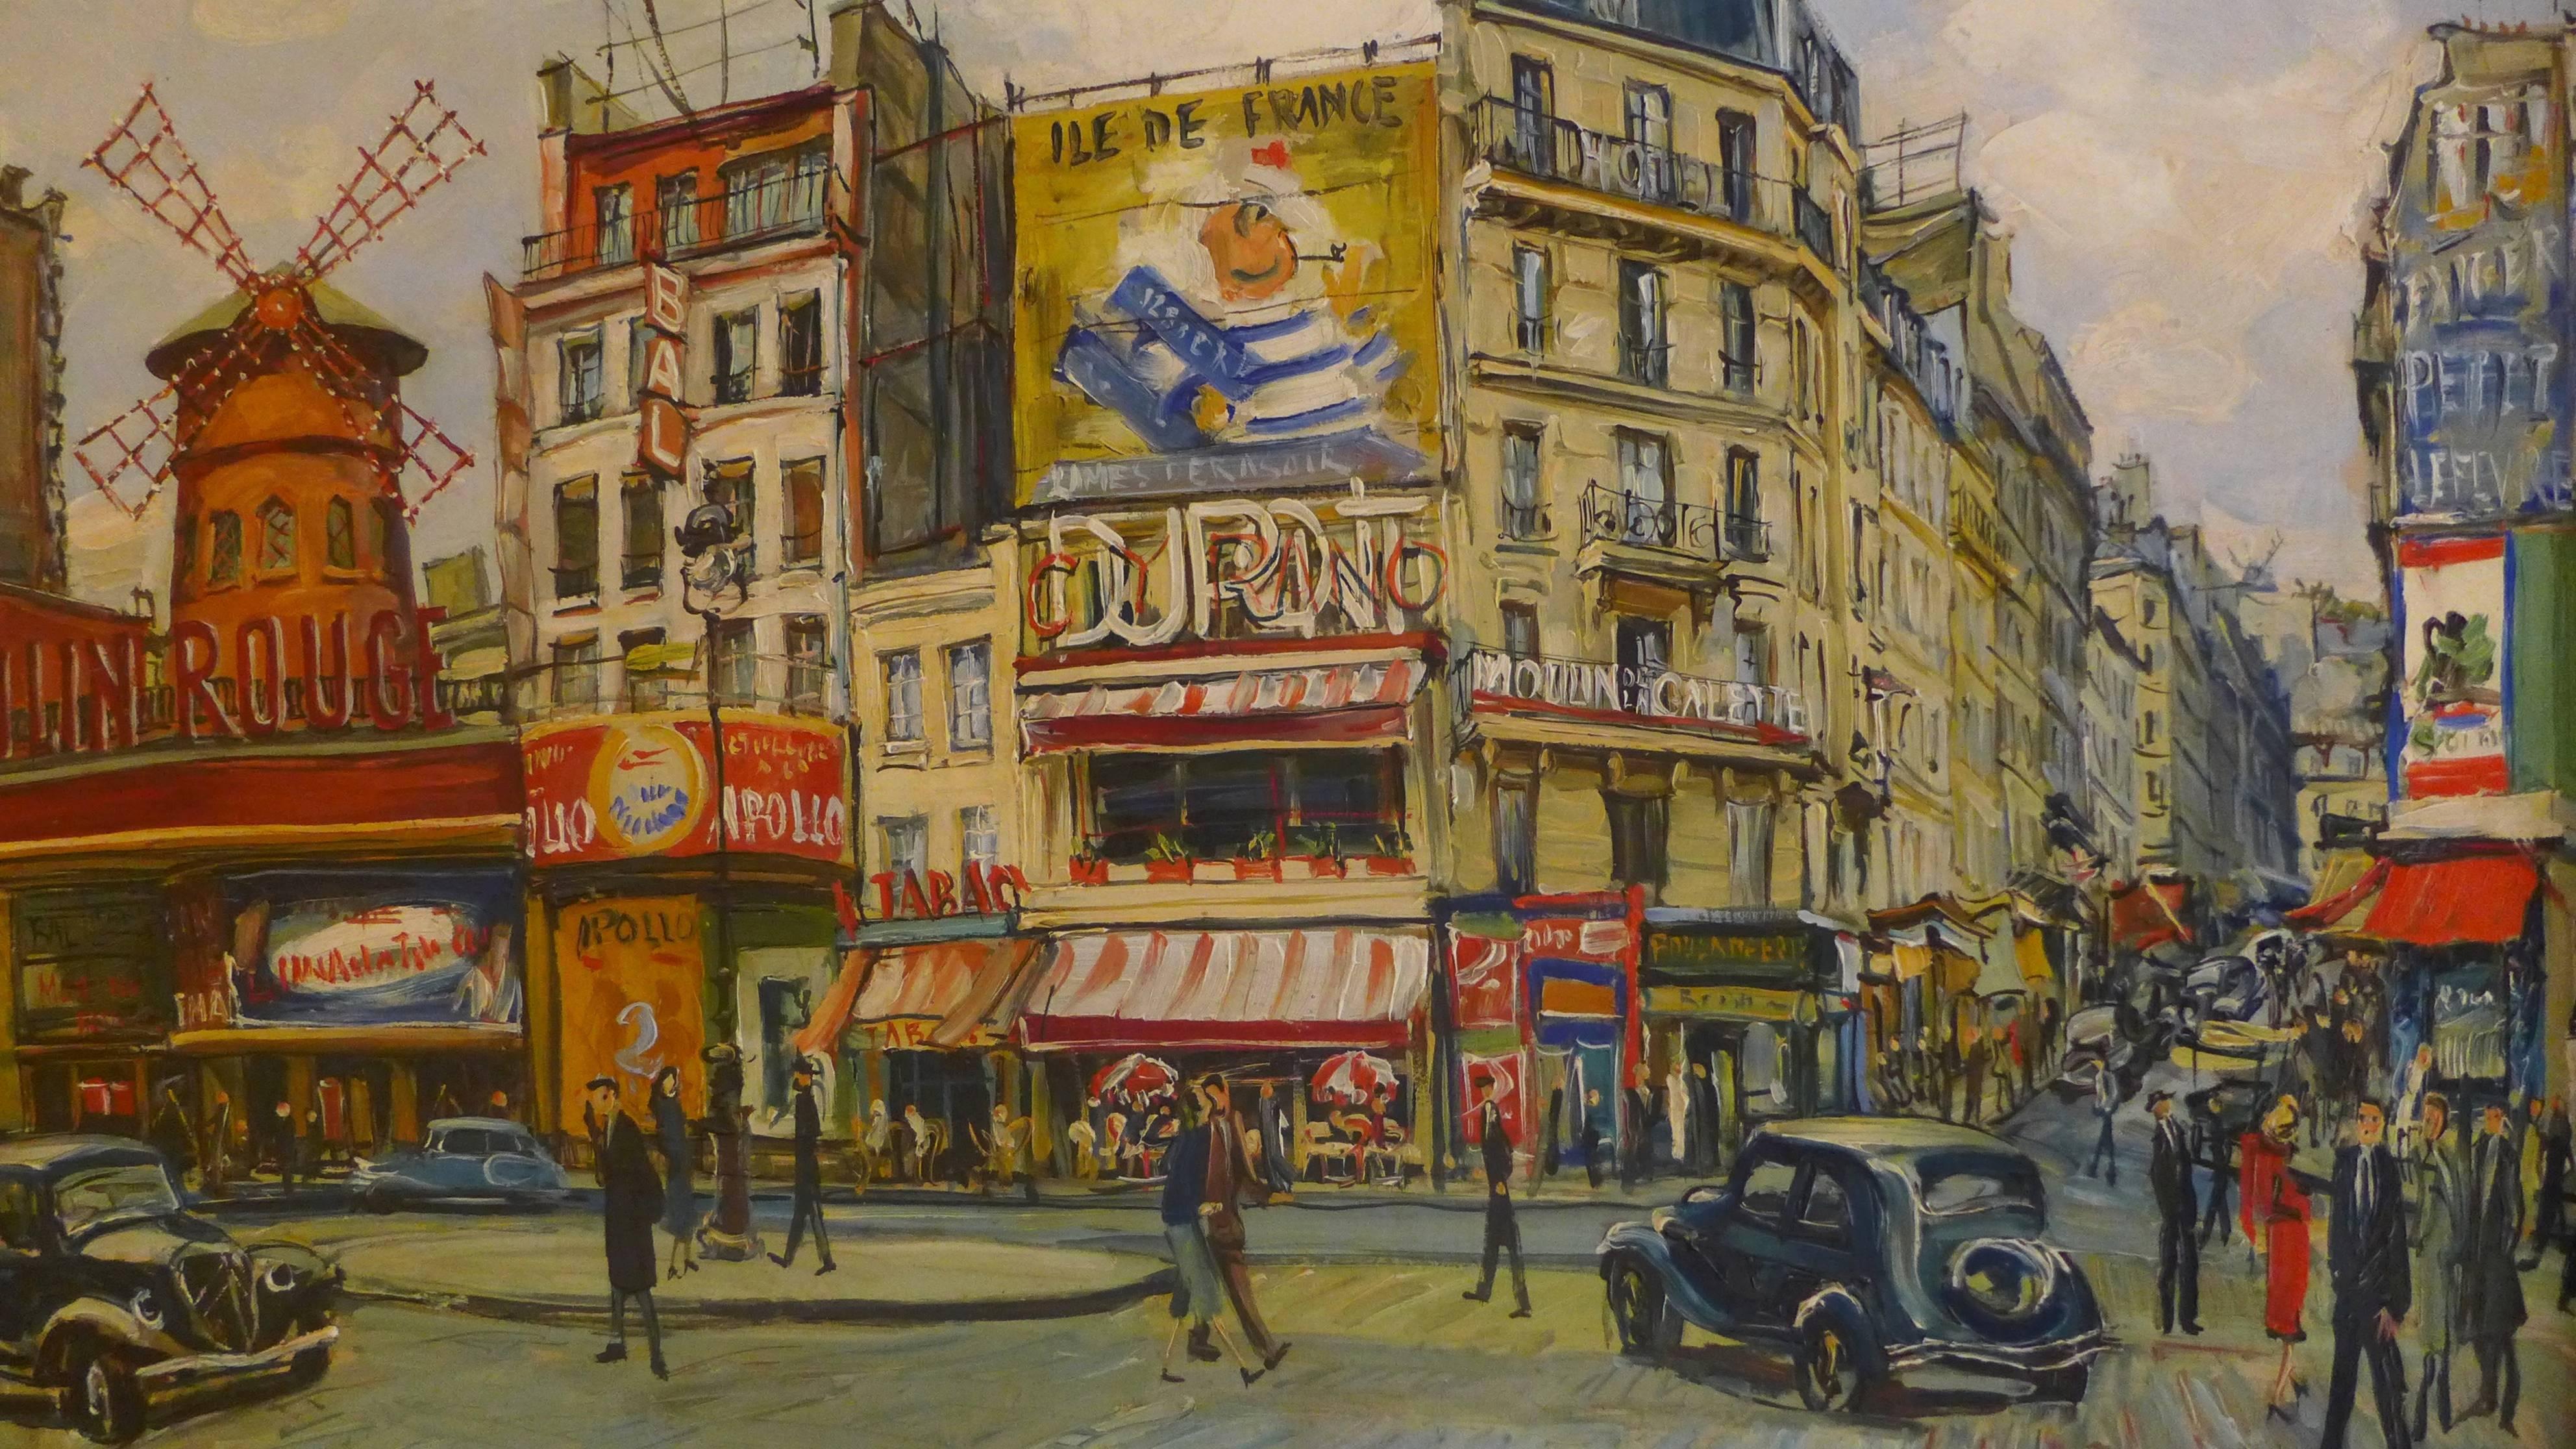 La Place Blanche in Paris with The Moulin Rouge, early 20h century circa 1925, signed lower left and dated on lower right by Alice Bailly.

Alice Bailly: Suisse painter, she was born on Geneva 1872 February 25, and she died in Lausannes 1938